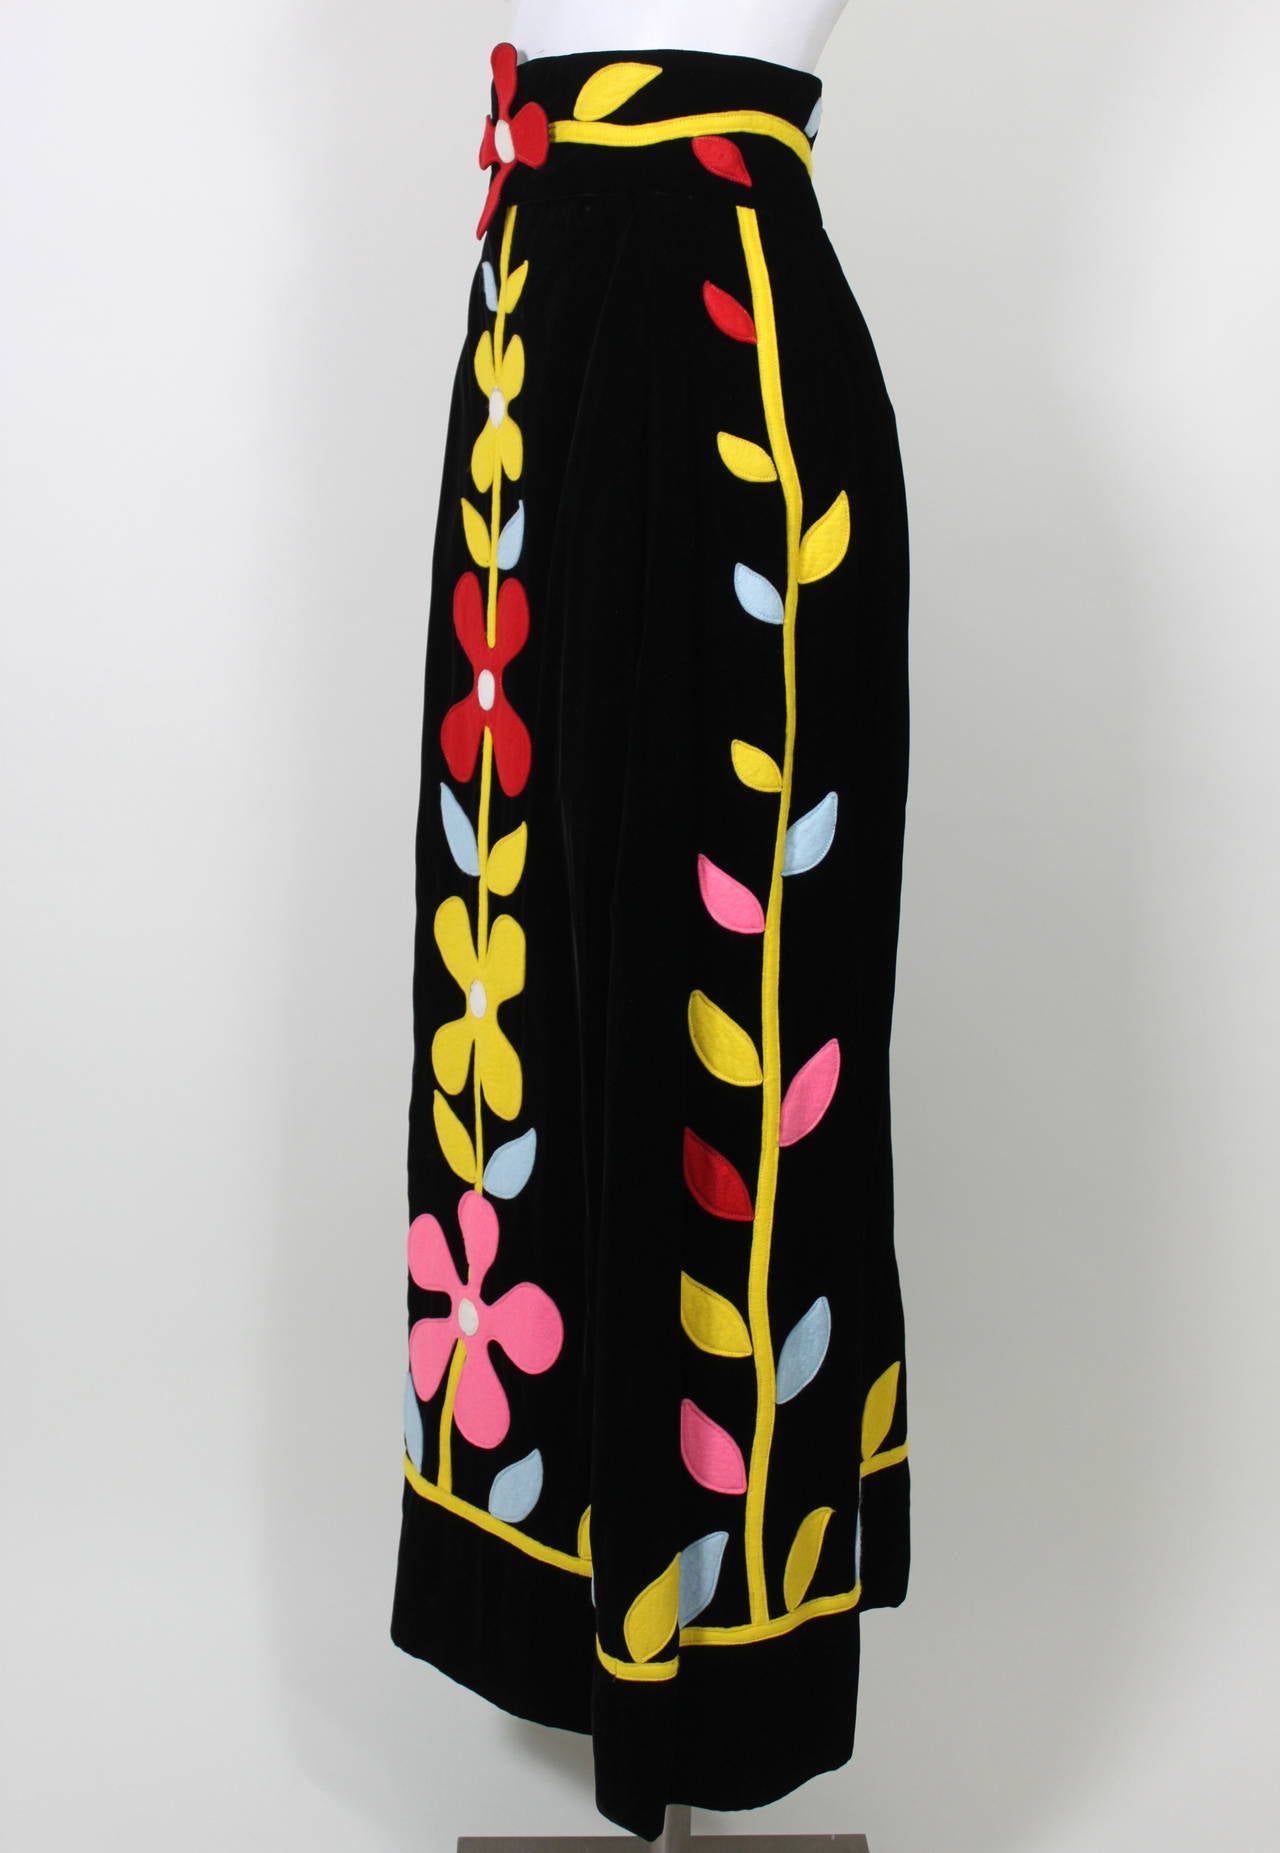 A fabulous mod skirt from Malcolm Starr done in a luscious black velvet and covered in mod felt floral appliqués throughout. It's bold, whimsical, and perfect for fall!

Measurements--
Waist: 26 inches
Hip: 34 inches
Length, Waist to Hem: 42